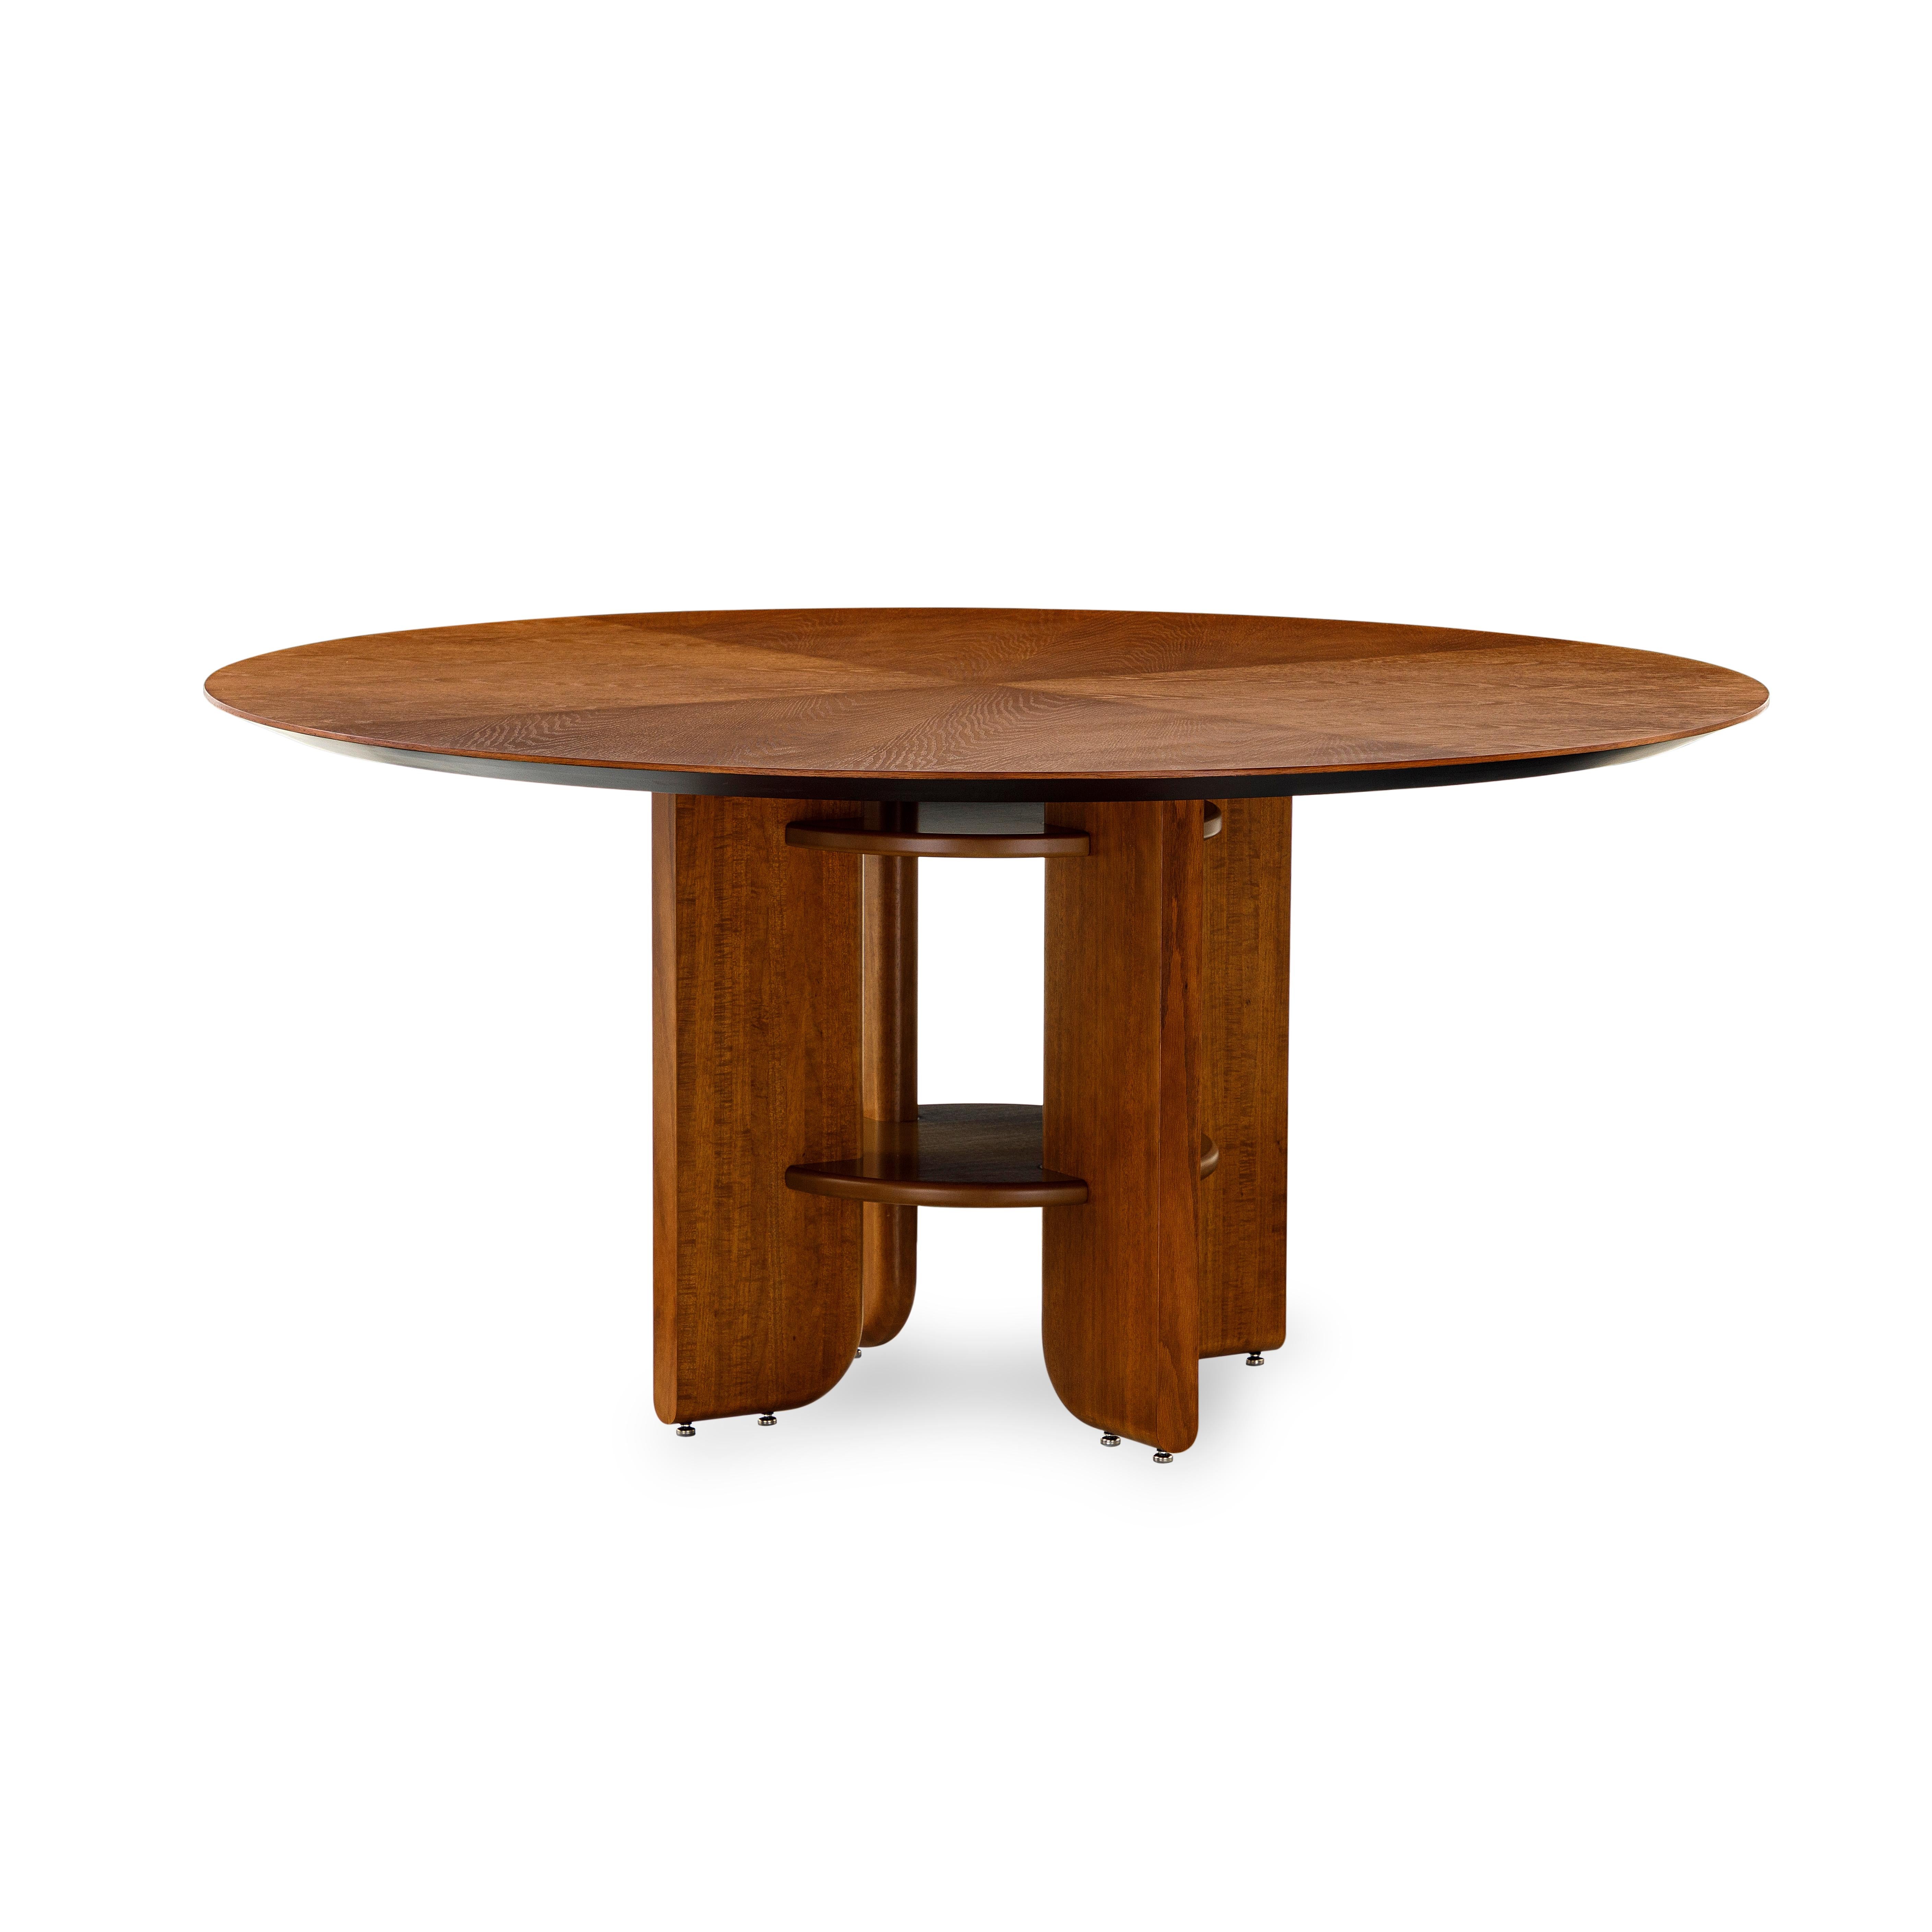 Brazilian Moon Round Dining Table with Almond Oak Veneered Top and Wood Legs 63'' For Sale